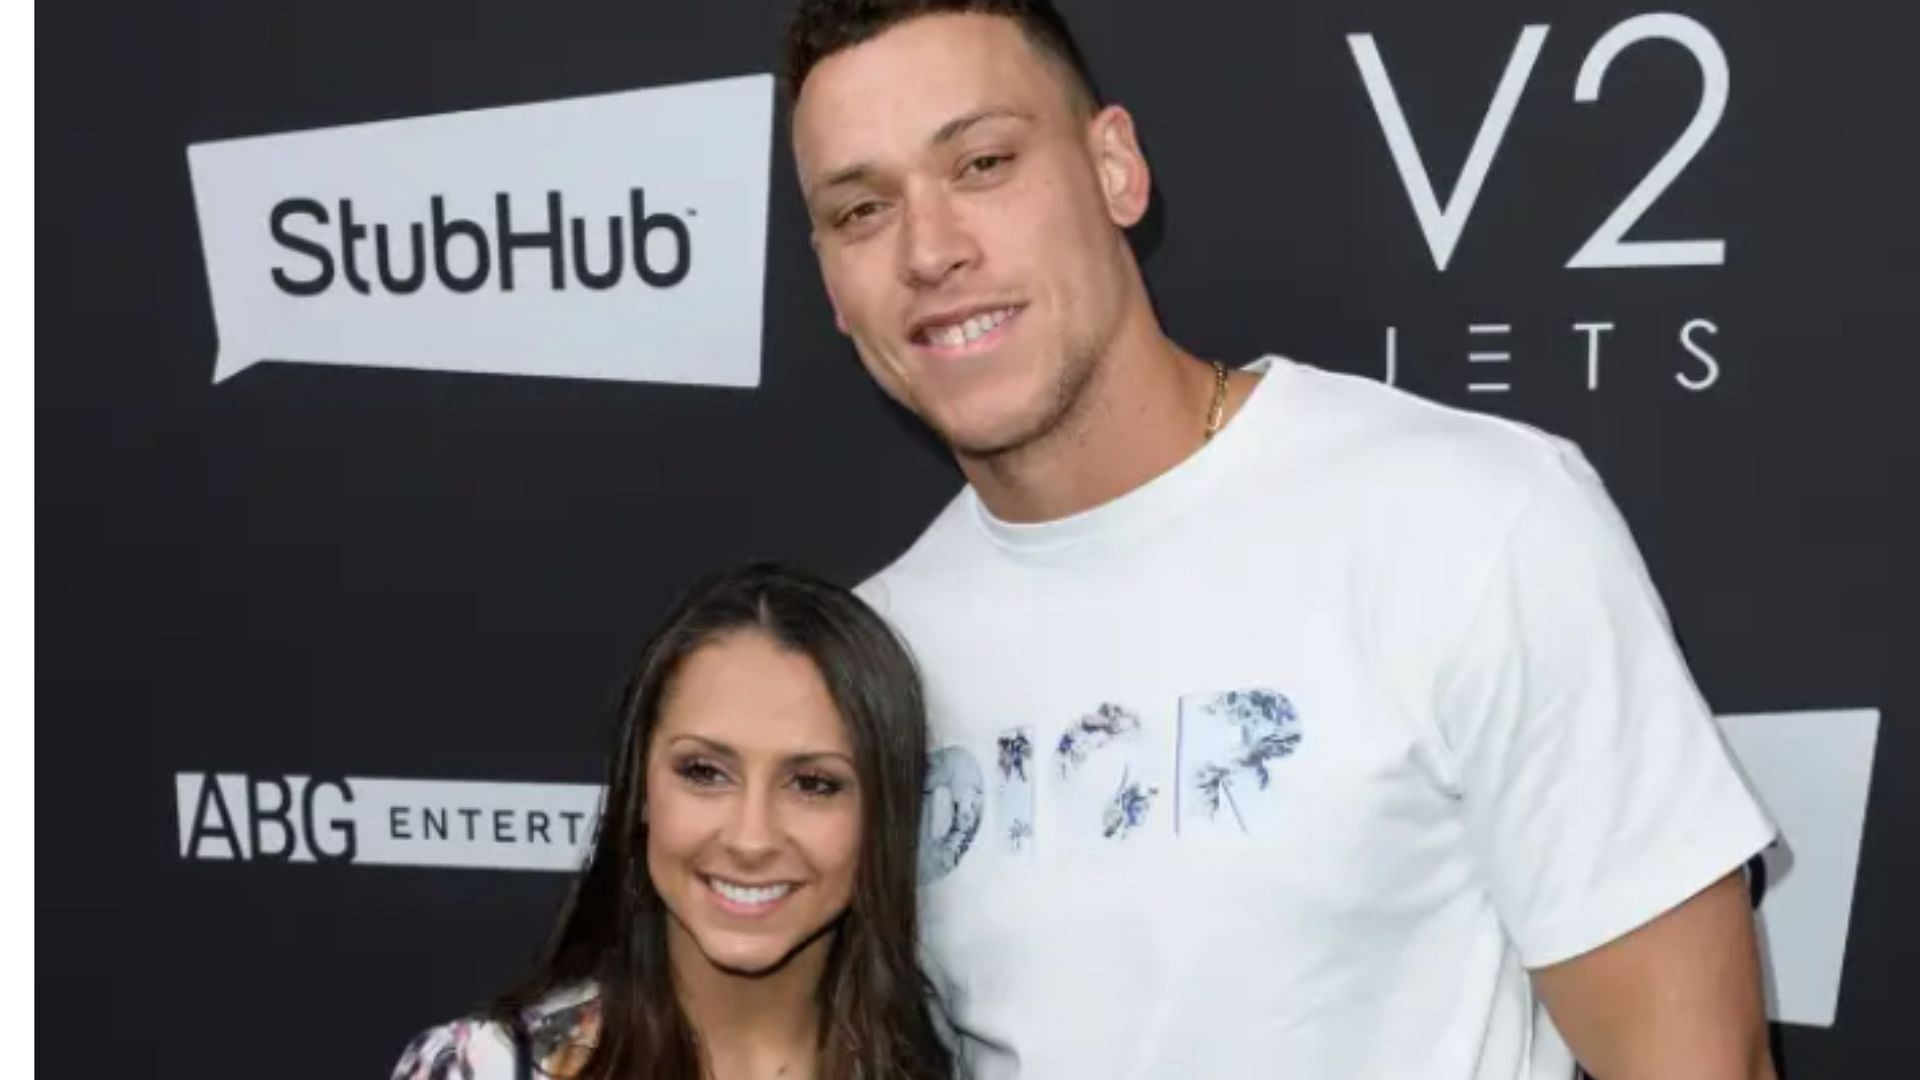 3 Things You Should Know About Mlb Star Aaron Judges Wife Samantha Bracksieck